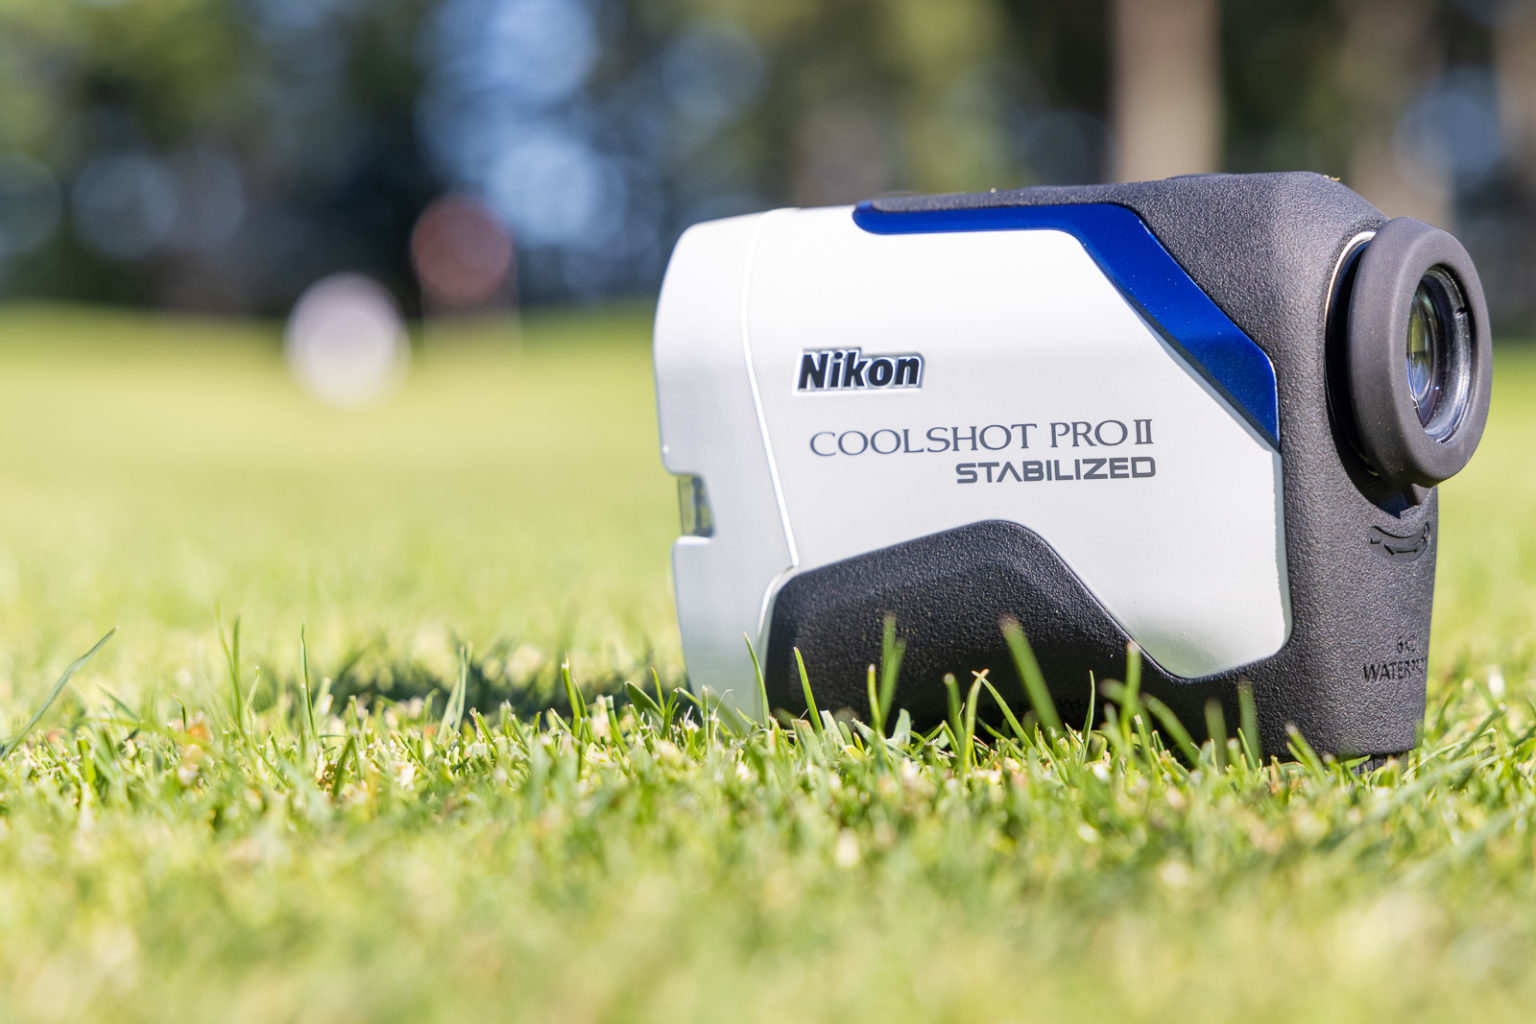 Nikon Coolshot ProII Stabilized Rangefinder Review: Can it Compete?